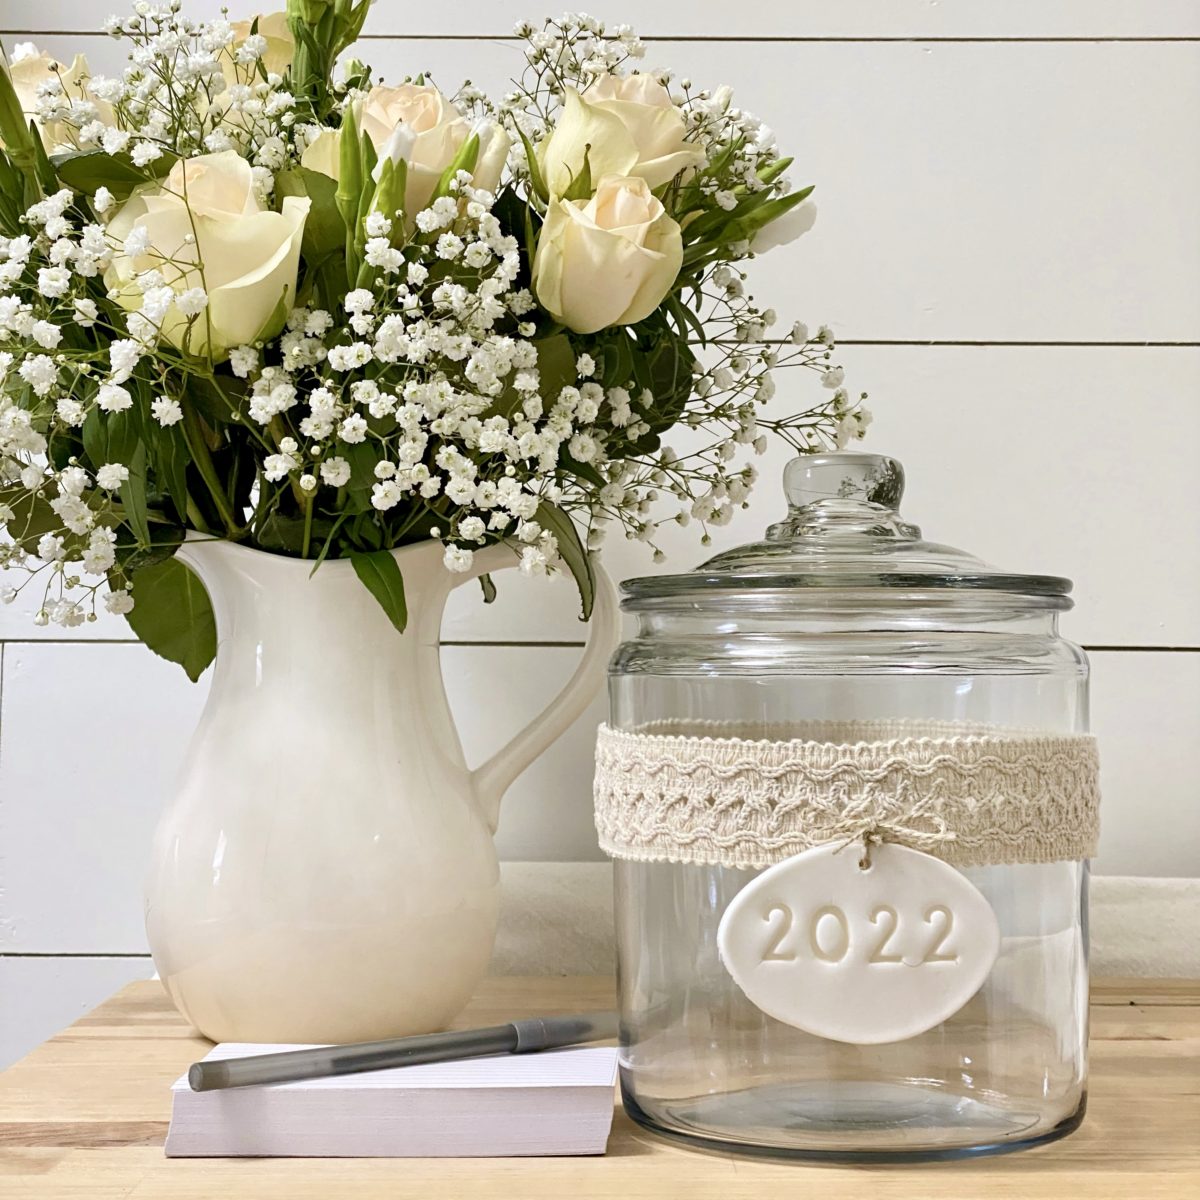 New year memory jar next to a stack of index cards with a pen on top and a pitcher of roses next to them.